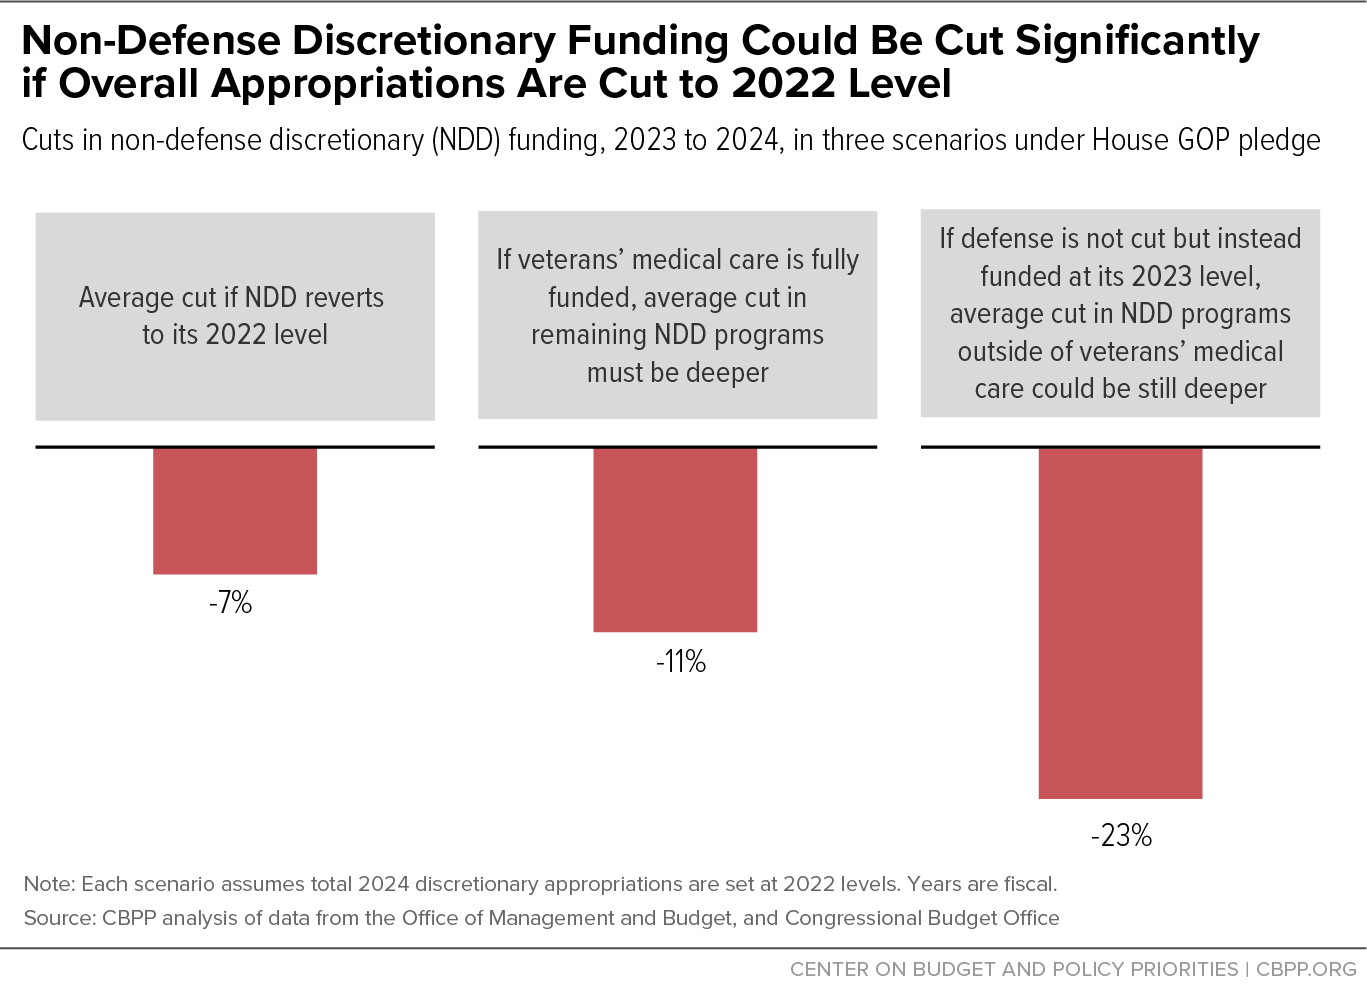 Non-Defense Discretionary if Overall Appropriations Funding Could Be Cut Significantly Are Cut to 2022 Level